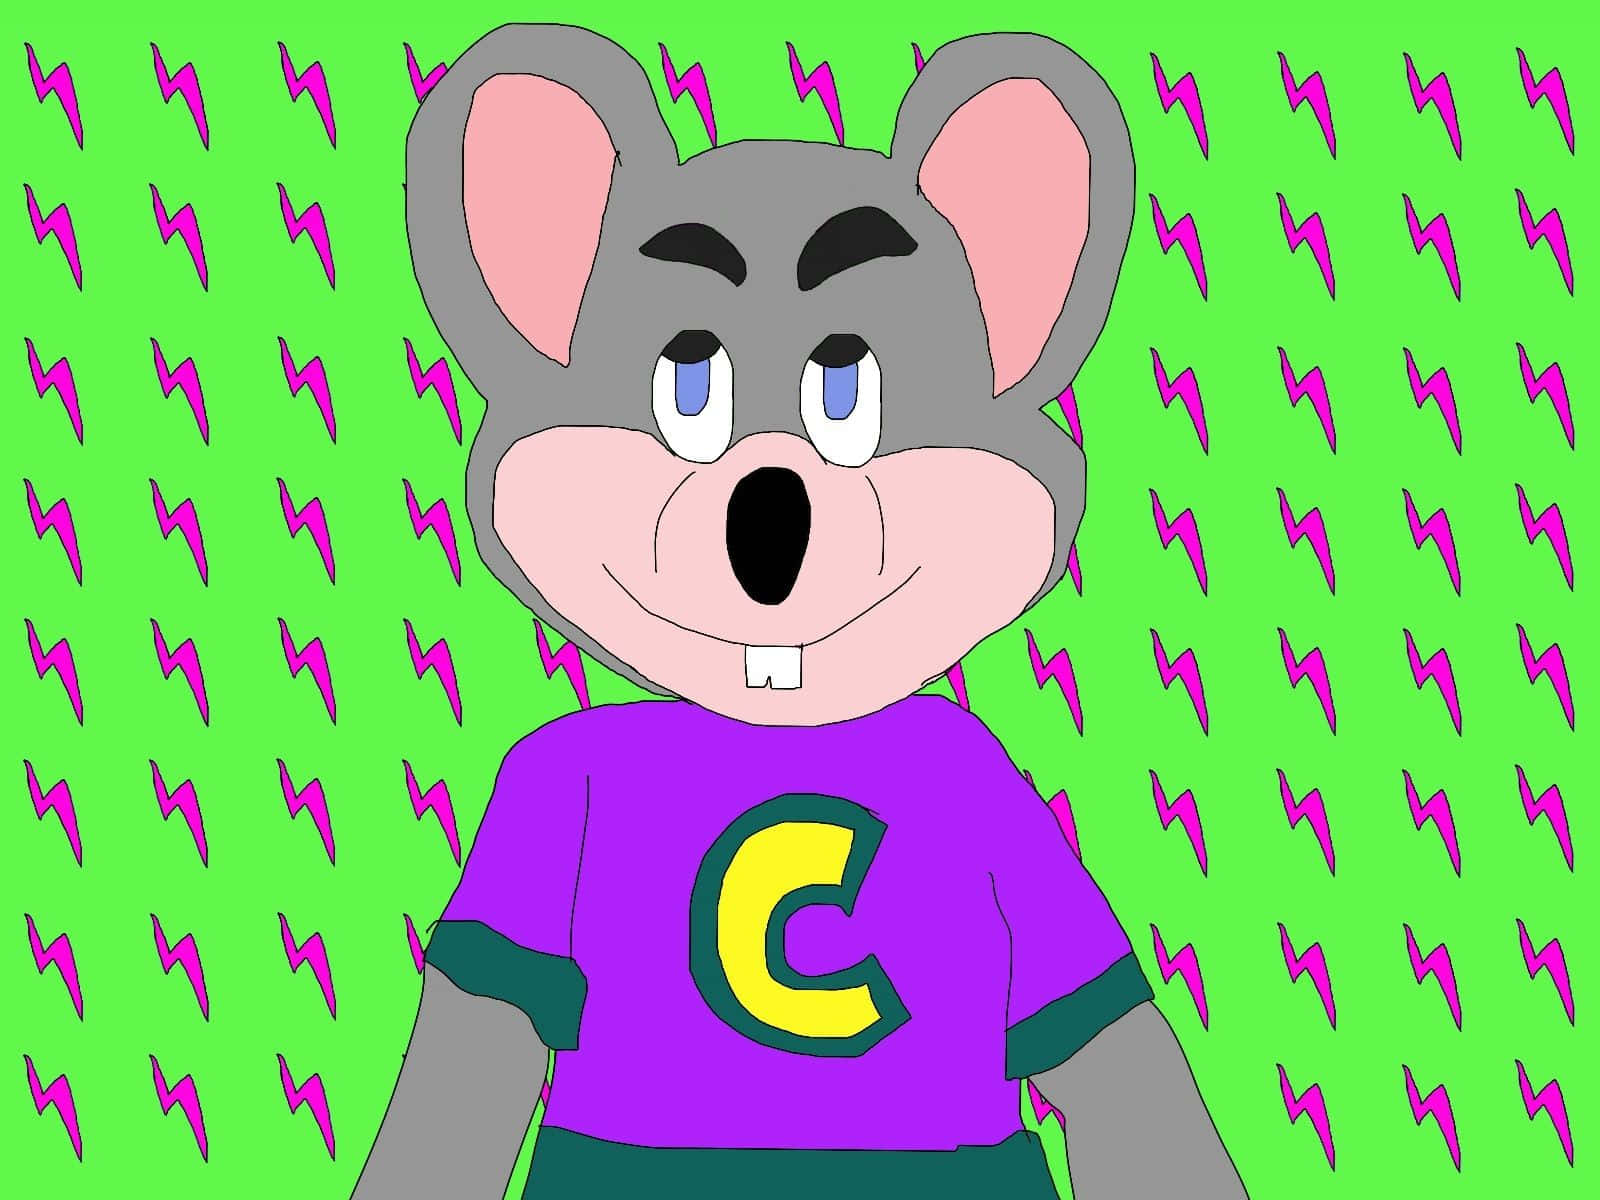 Visit Chuck E Cheese and enjoy the family-friendly fun!